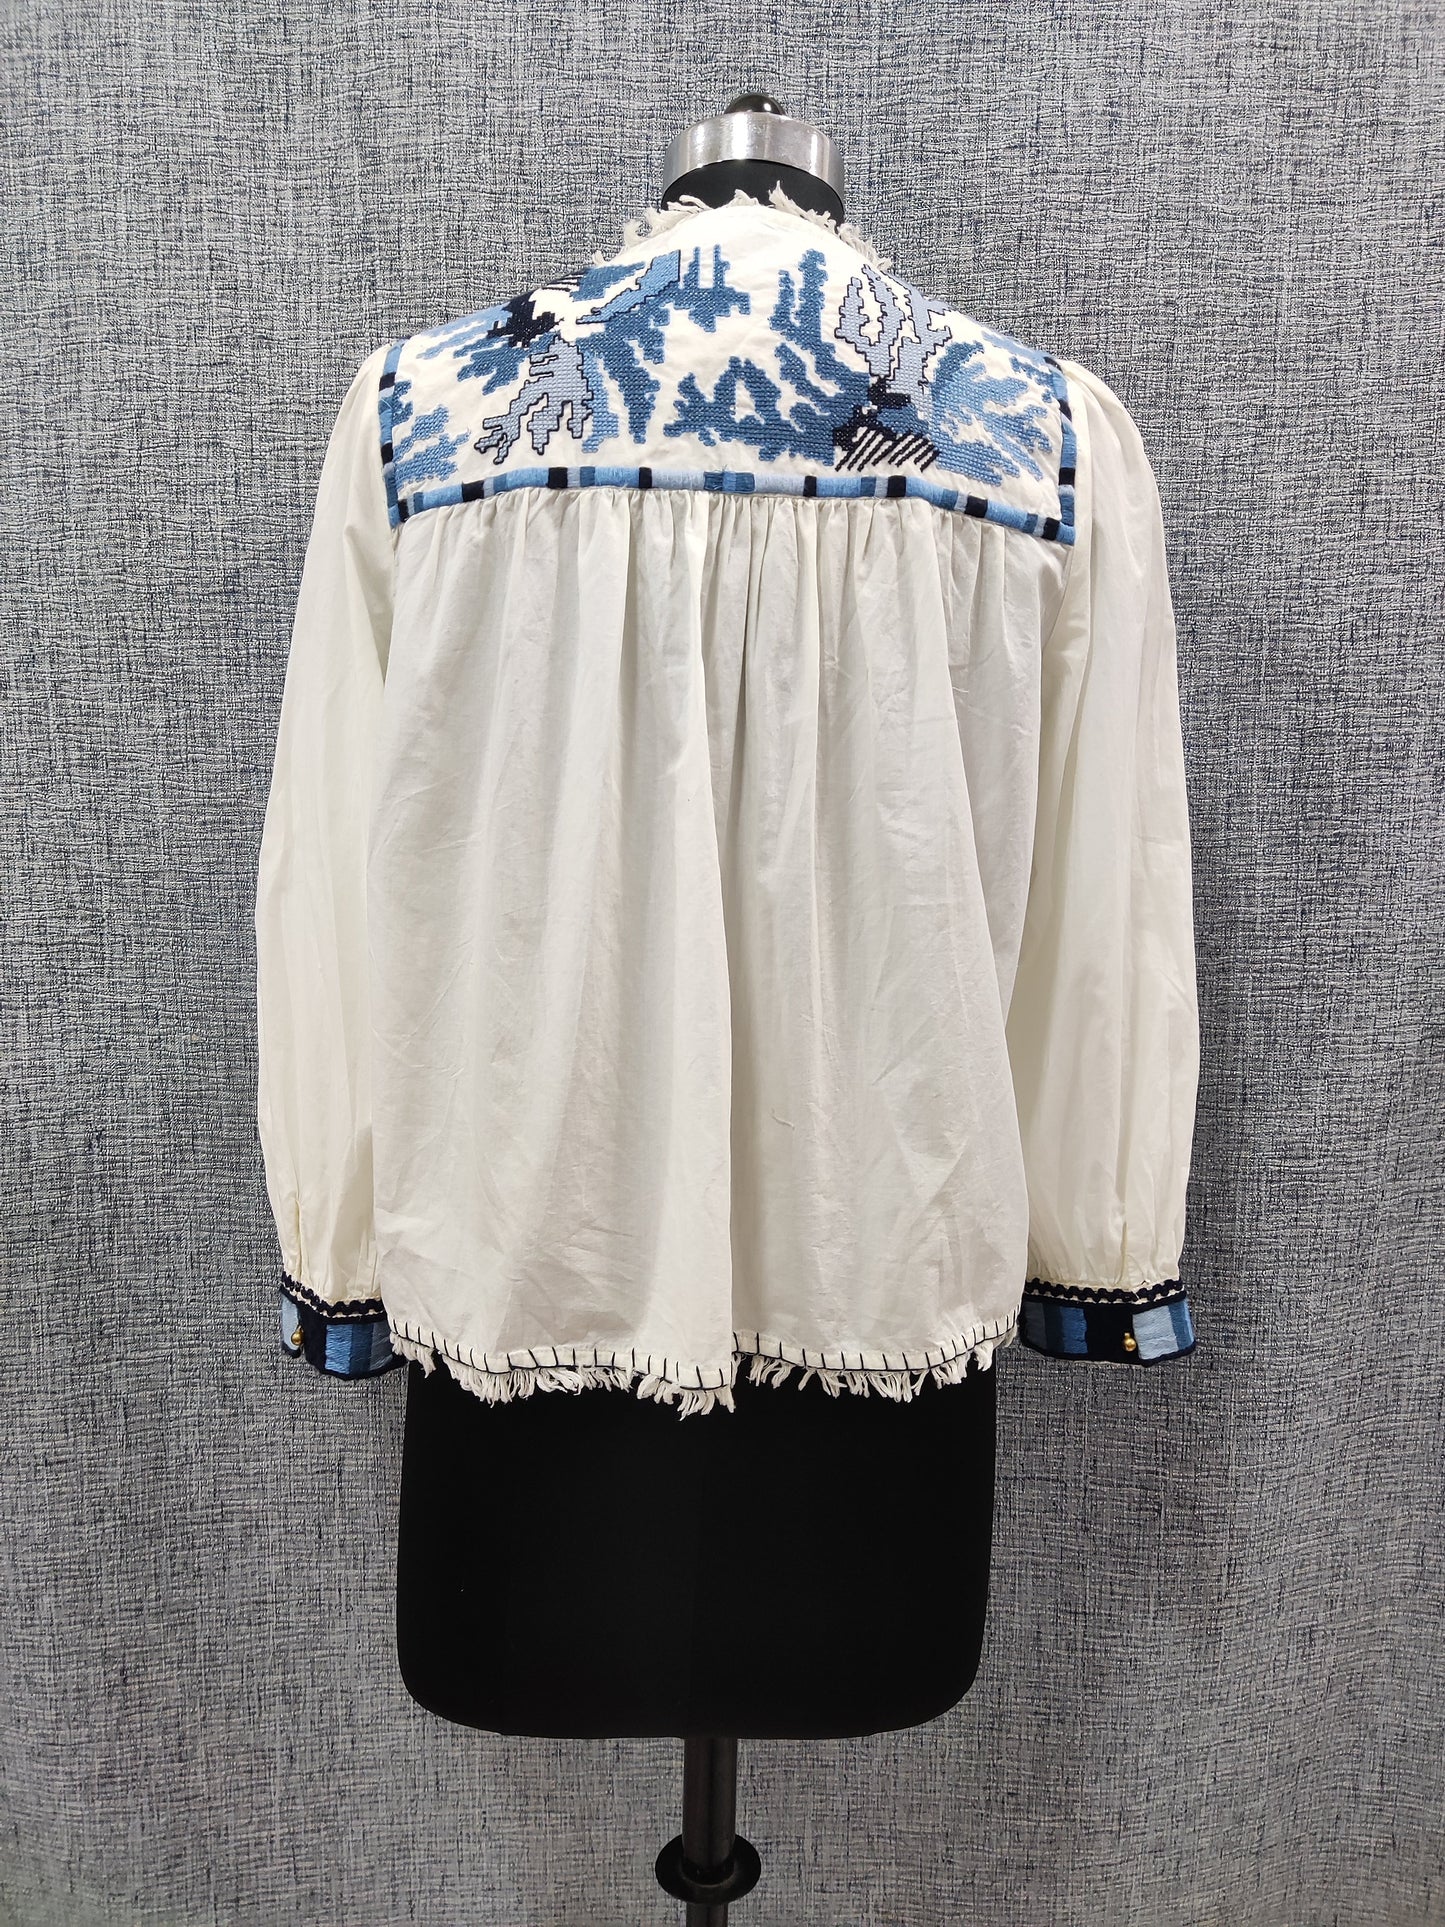 ZARA White And Blue Floral Embroidered Jacket | Relove